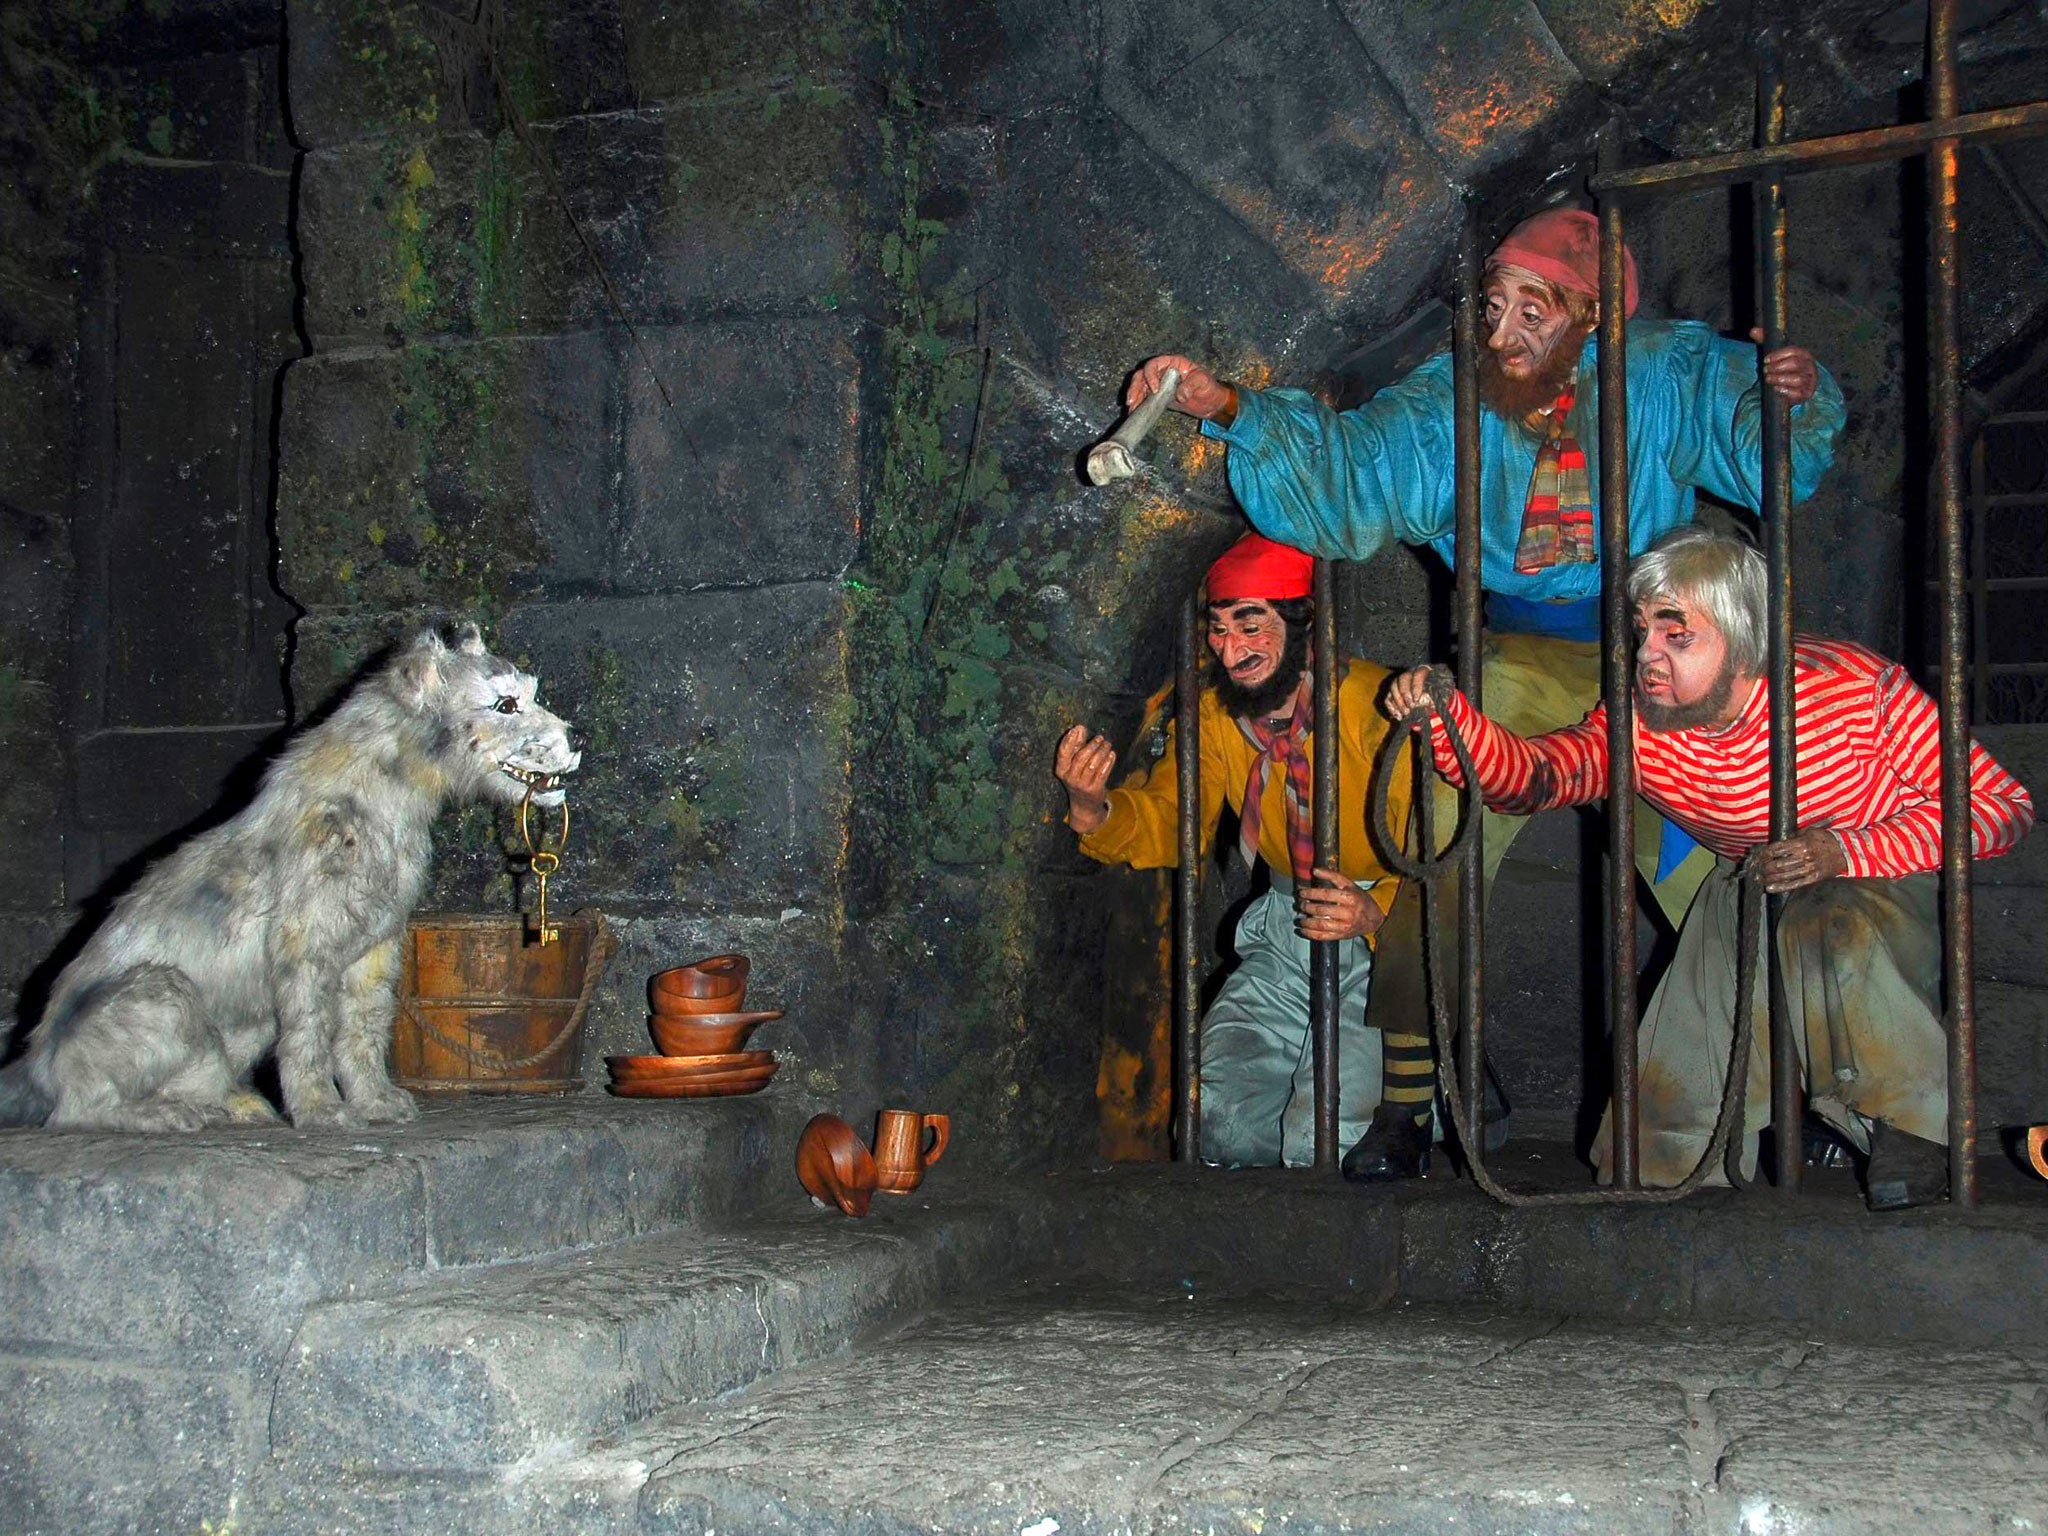 Figures seen on the Pirates of the Caribbean ride